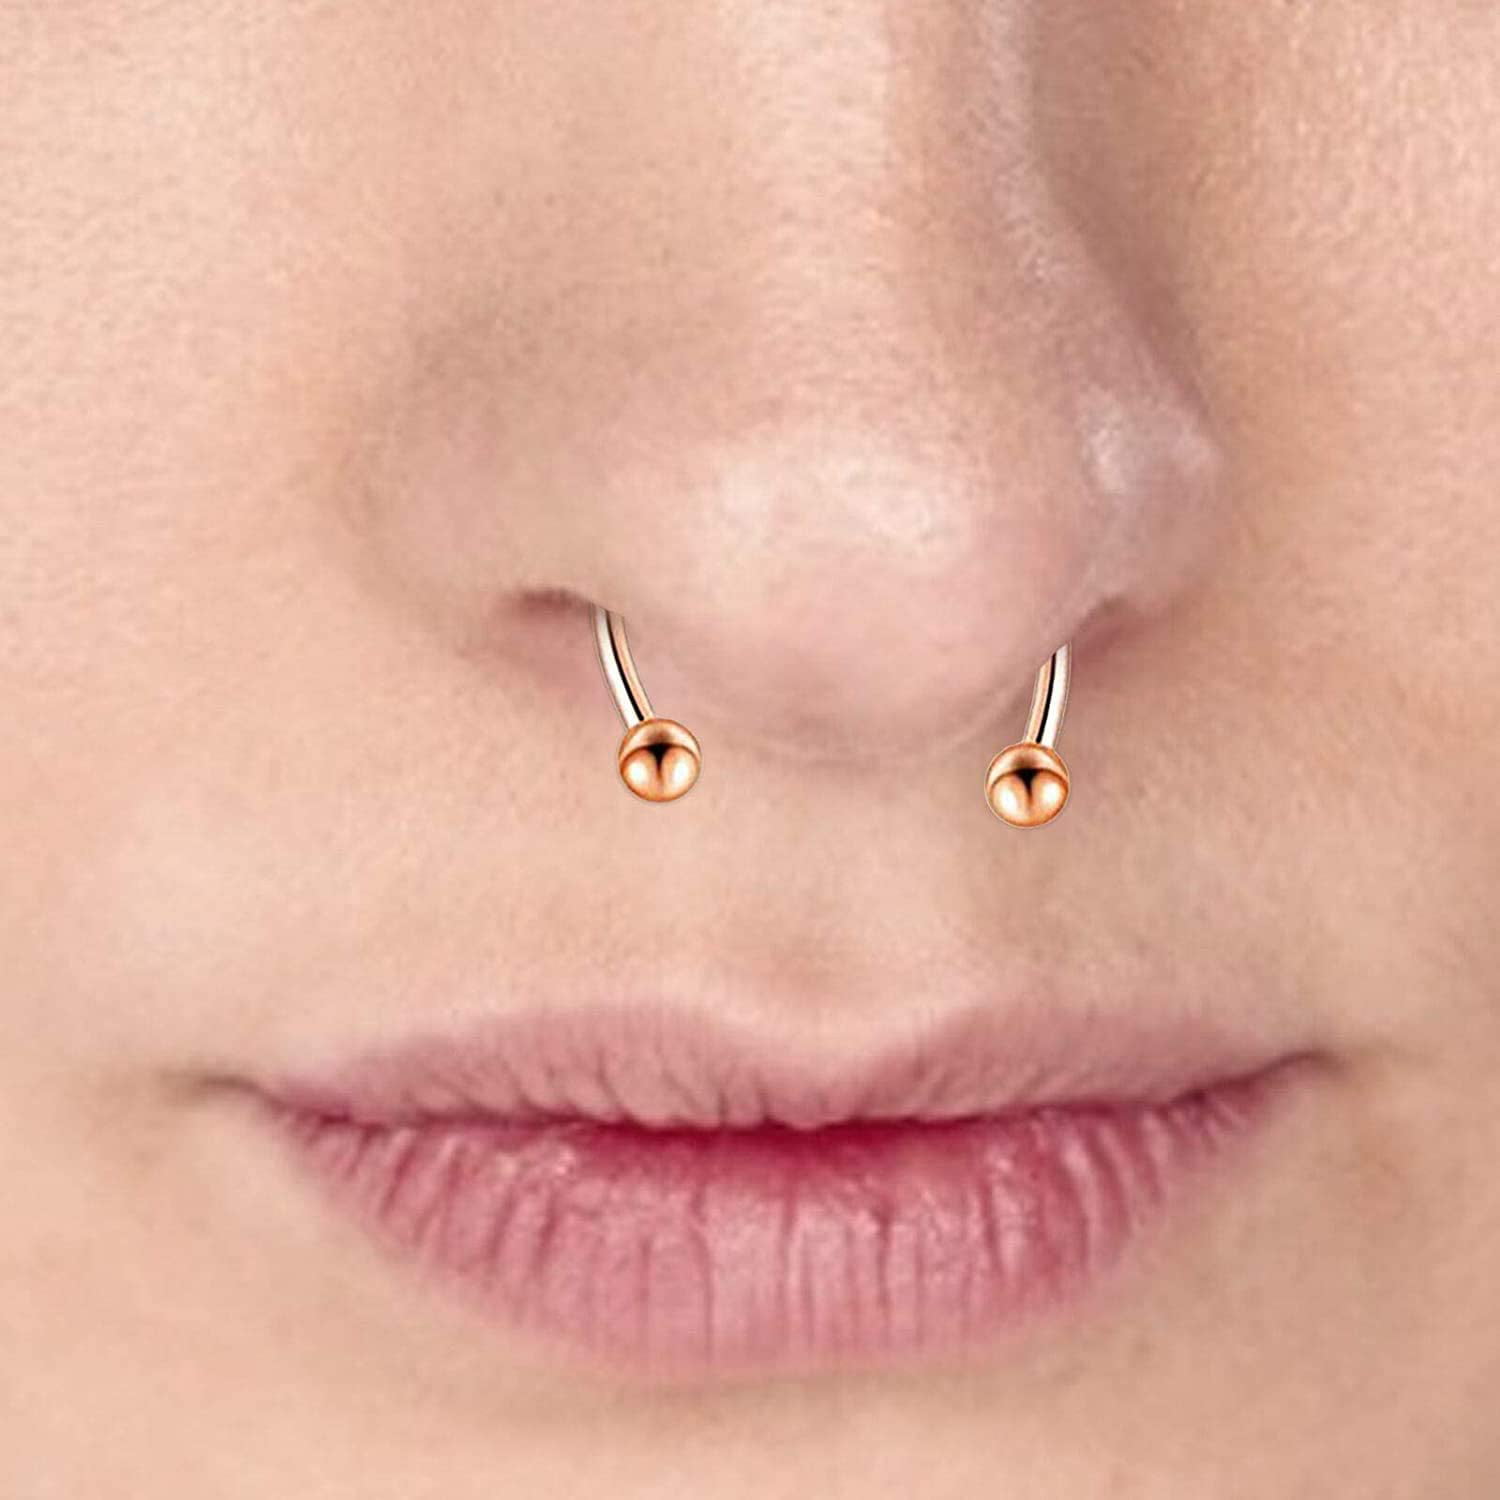 WBRWP Unisex Strong Magnetic Septum Nose Ring Horseshoe 316L Stainless Steel 16G 10MM Fake Nose Ring Reusable Nose Ring Non-Piercing Strong Magnetic Nose Ring for Men and Women 